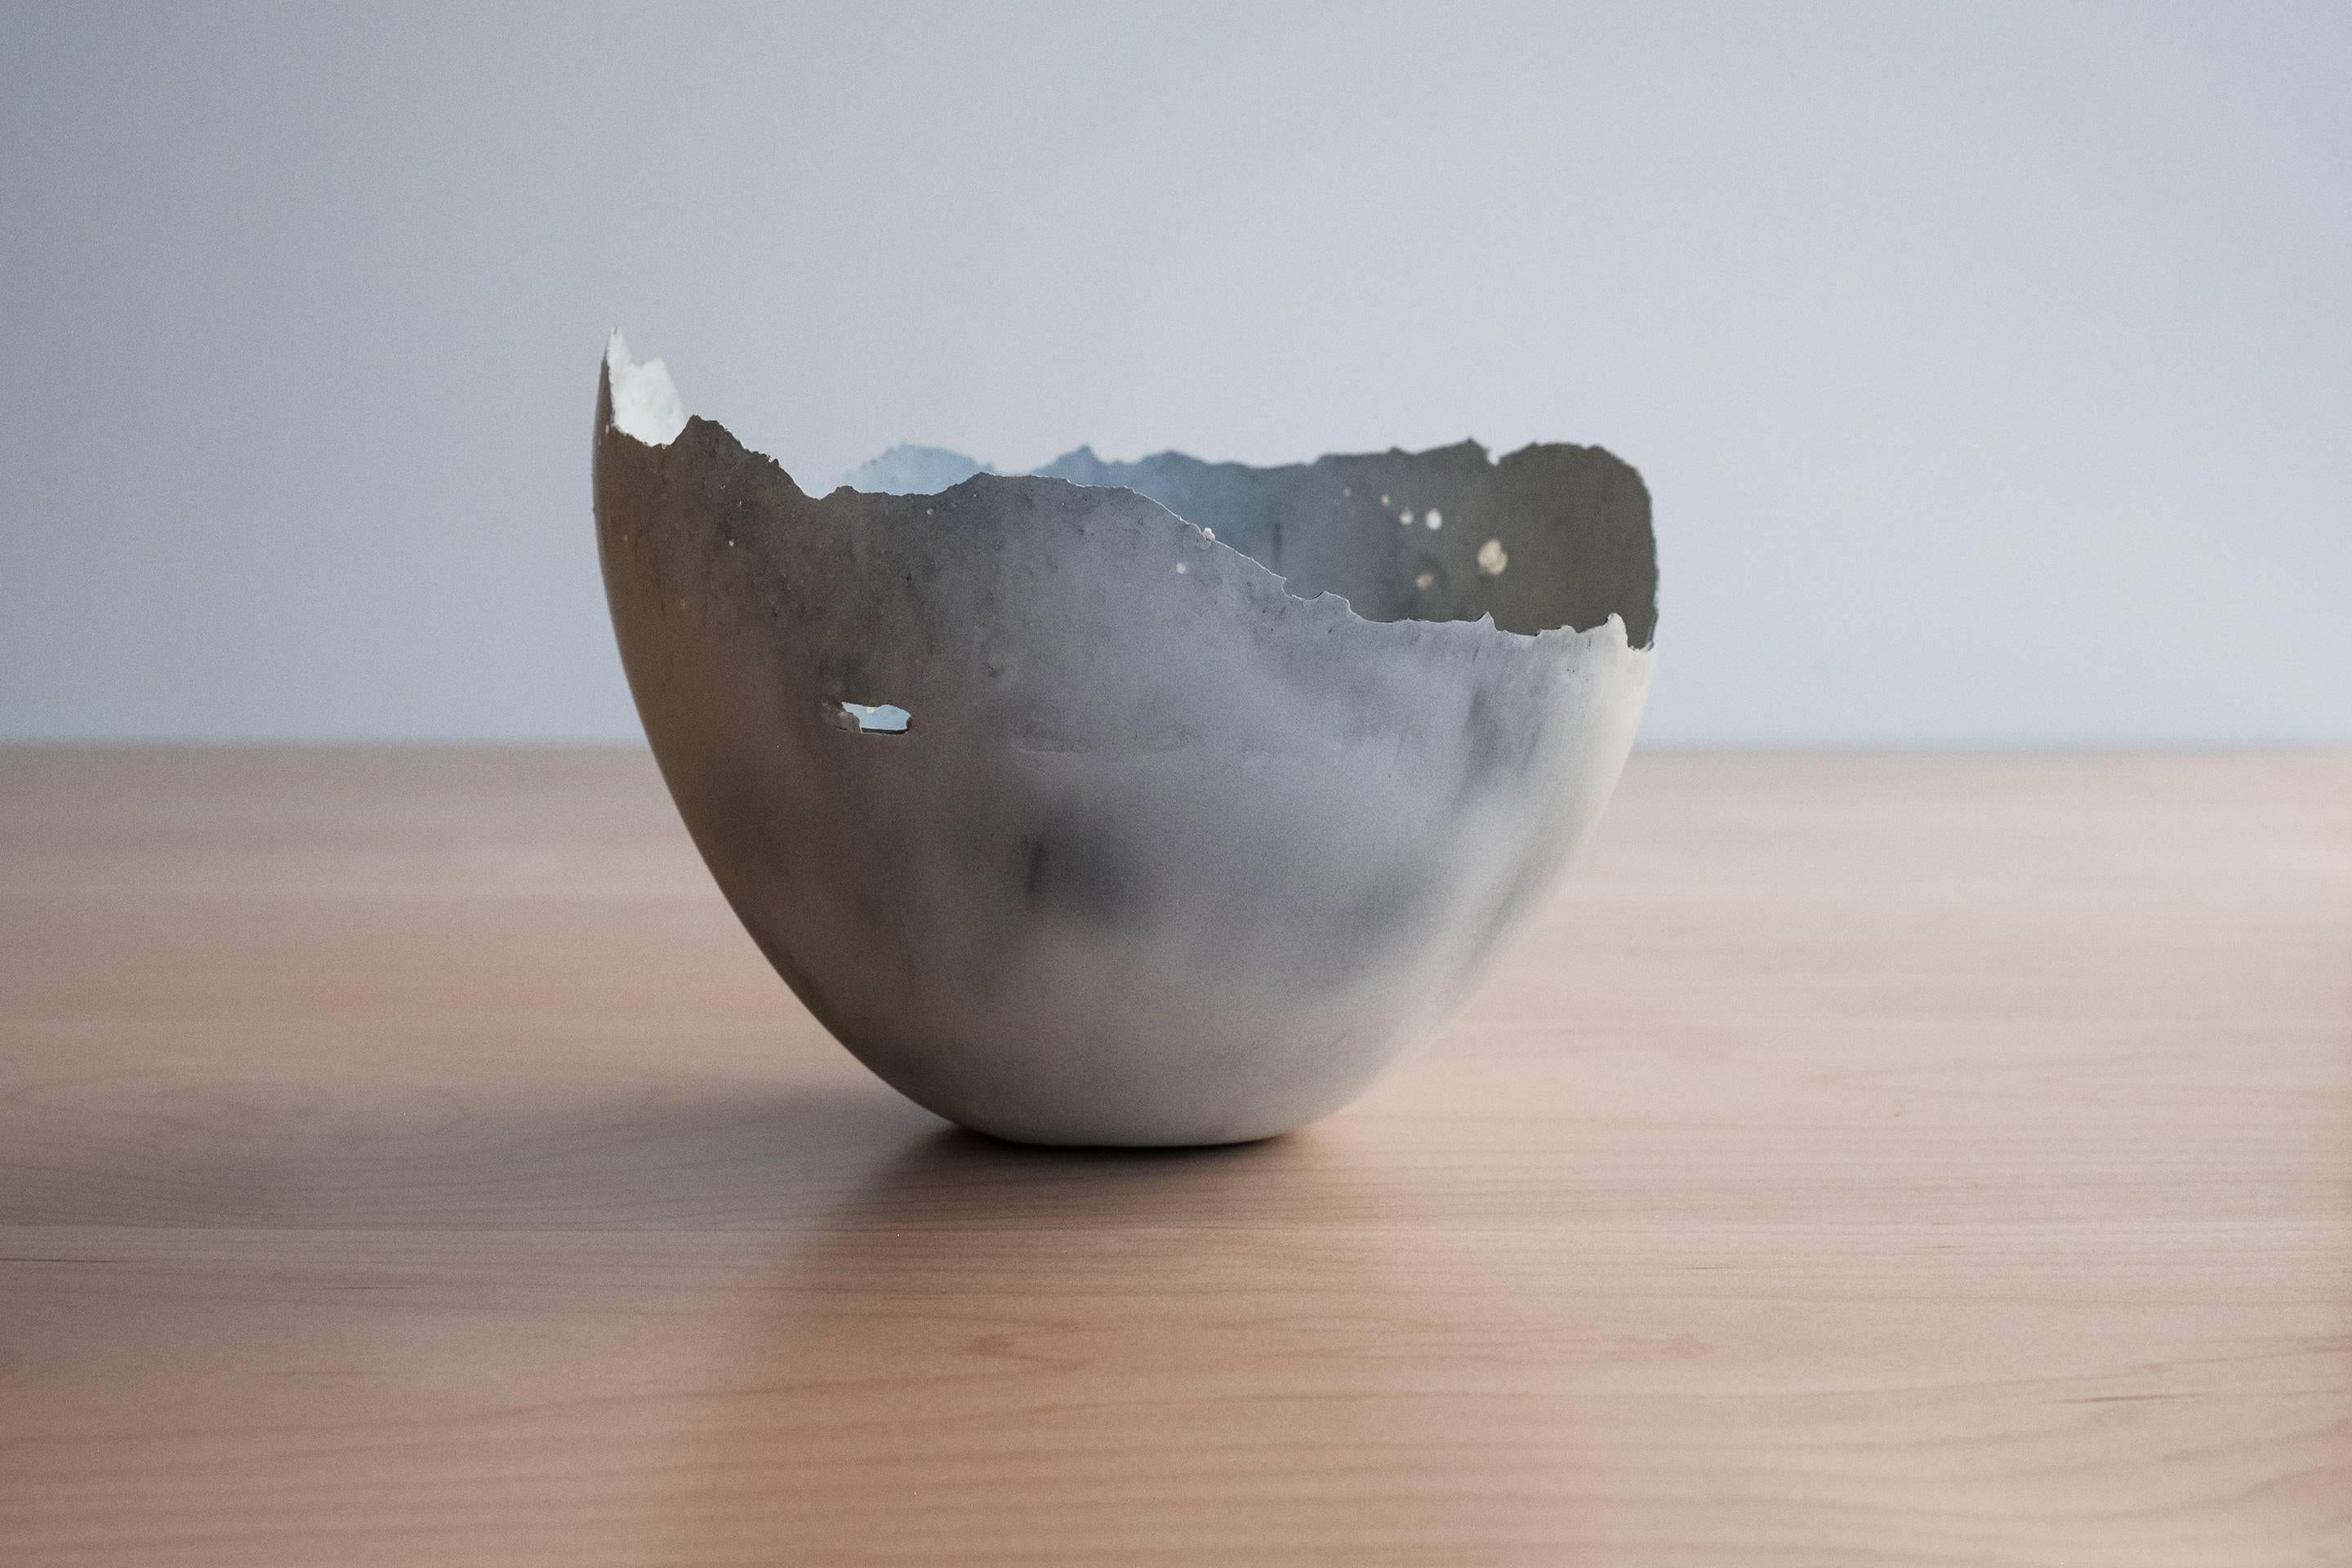 A collection of 200 unique bowls, the Concrete Series by UMÉ Studio expresses the tension between heavy concrete and its delicate edge generated by hand pouring. While one assumes concrete should be strong and durable, it is, at its core, fragile.